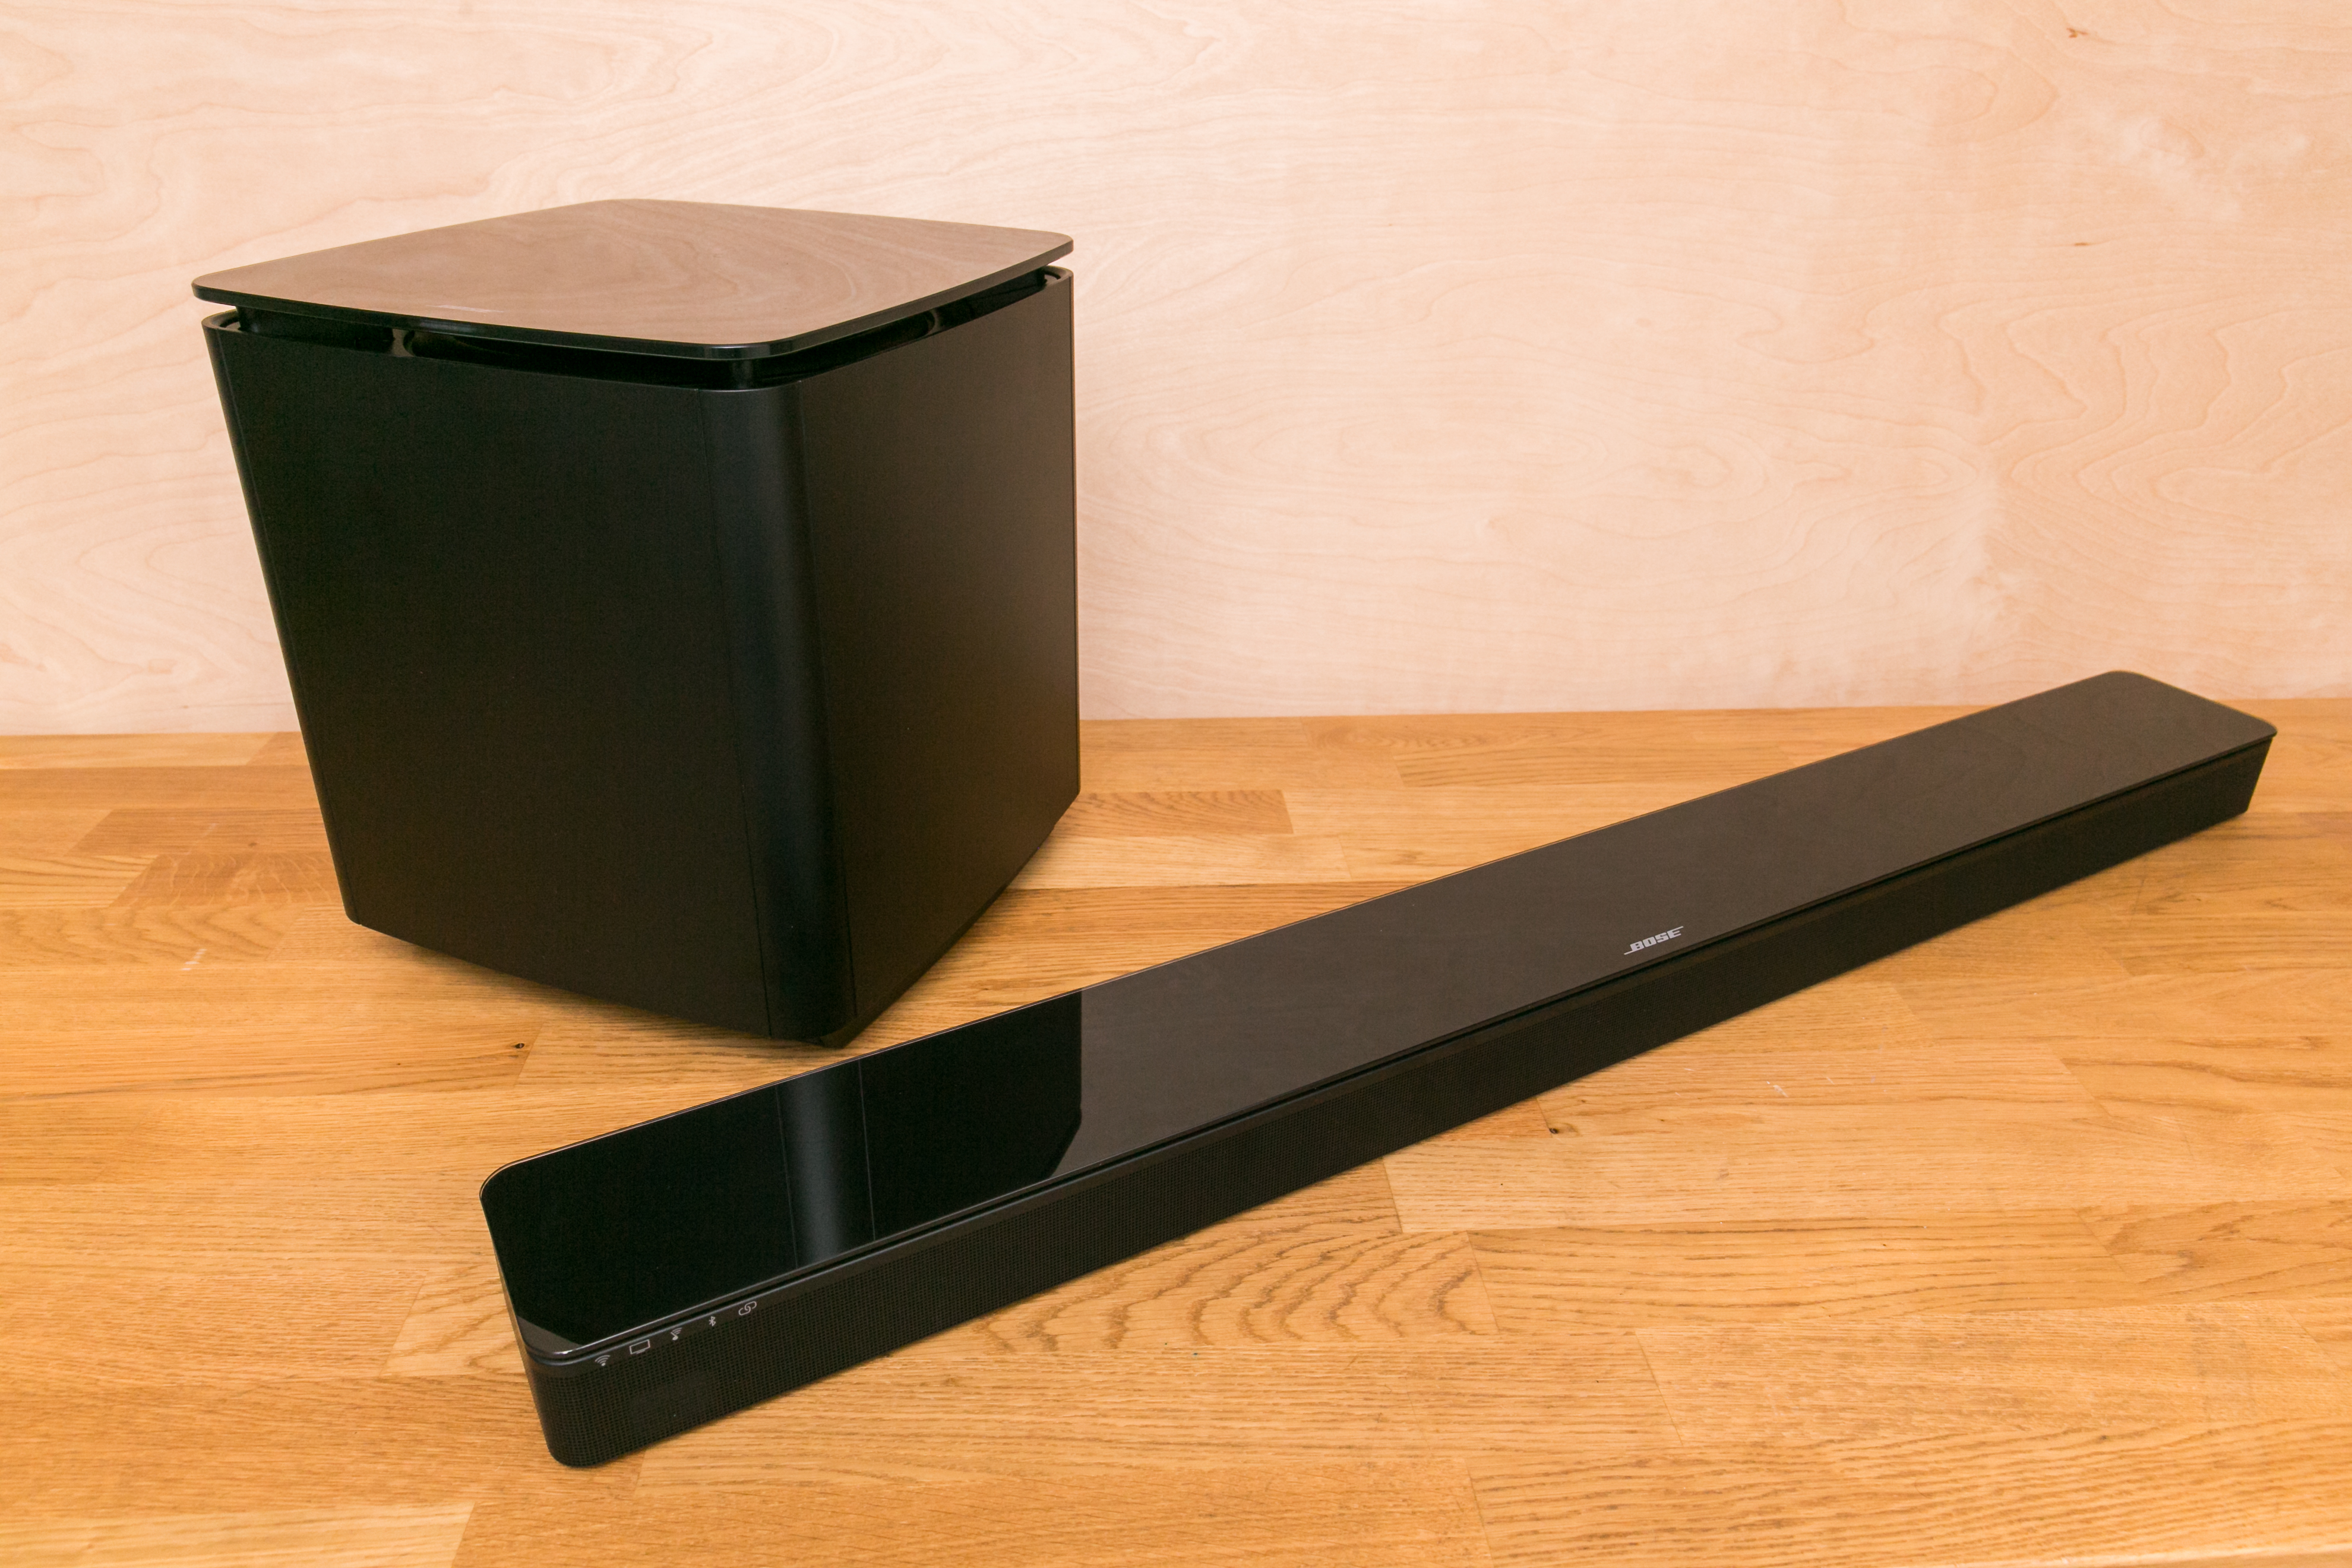 Bose SoundTouch 300 review: Bose takes on Sonos and (mostly) wins